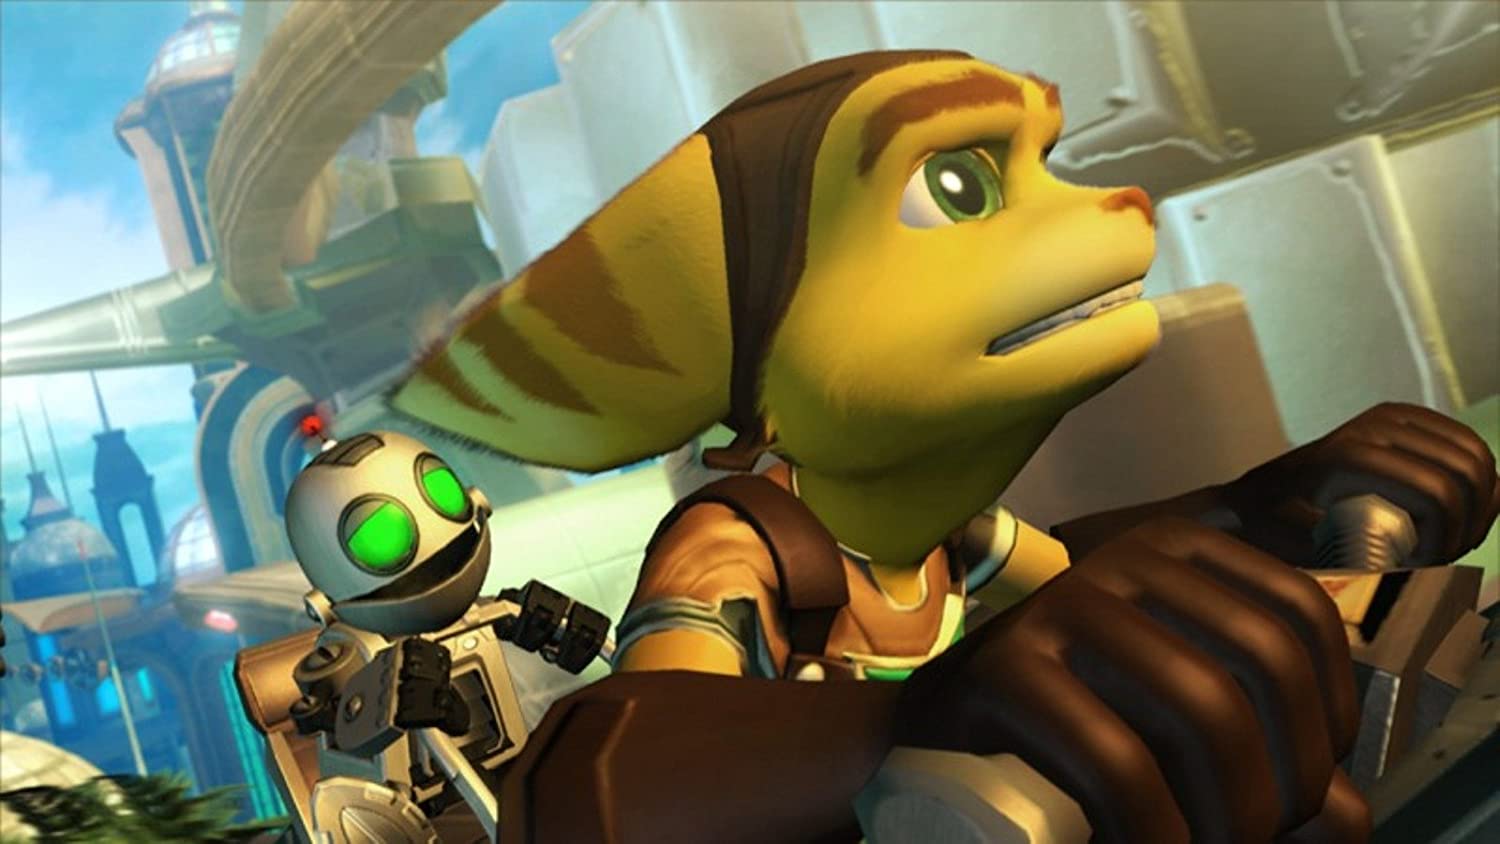 playstation-plus-premium-is-adding-5-more-ratchet-clank-games-this-month-vgc